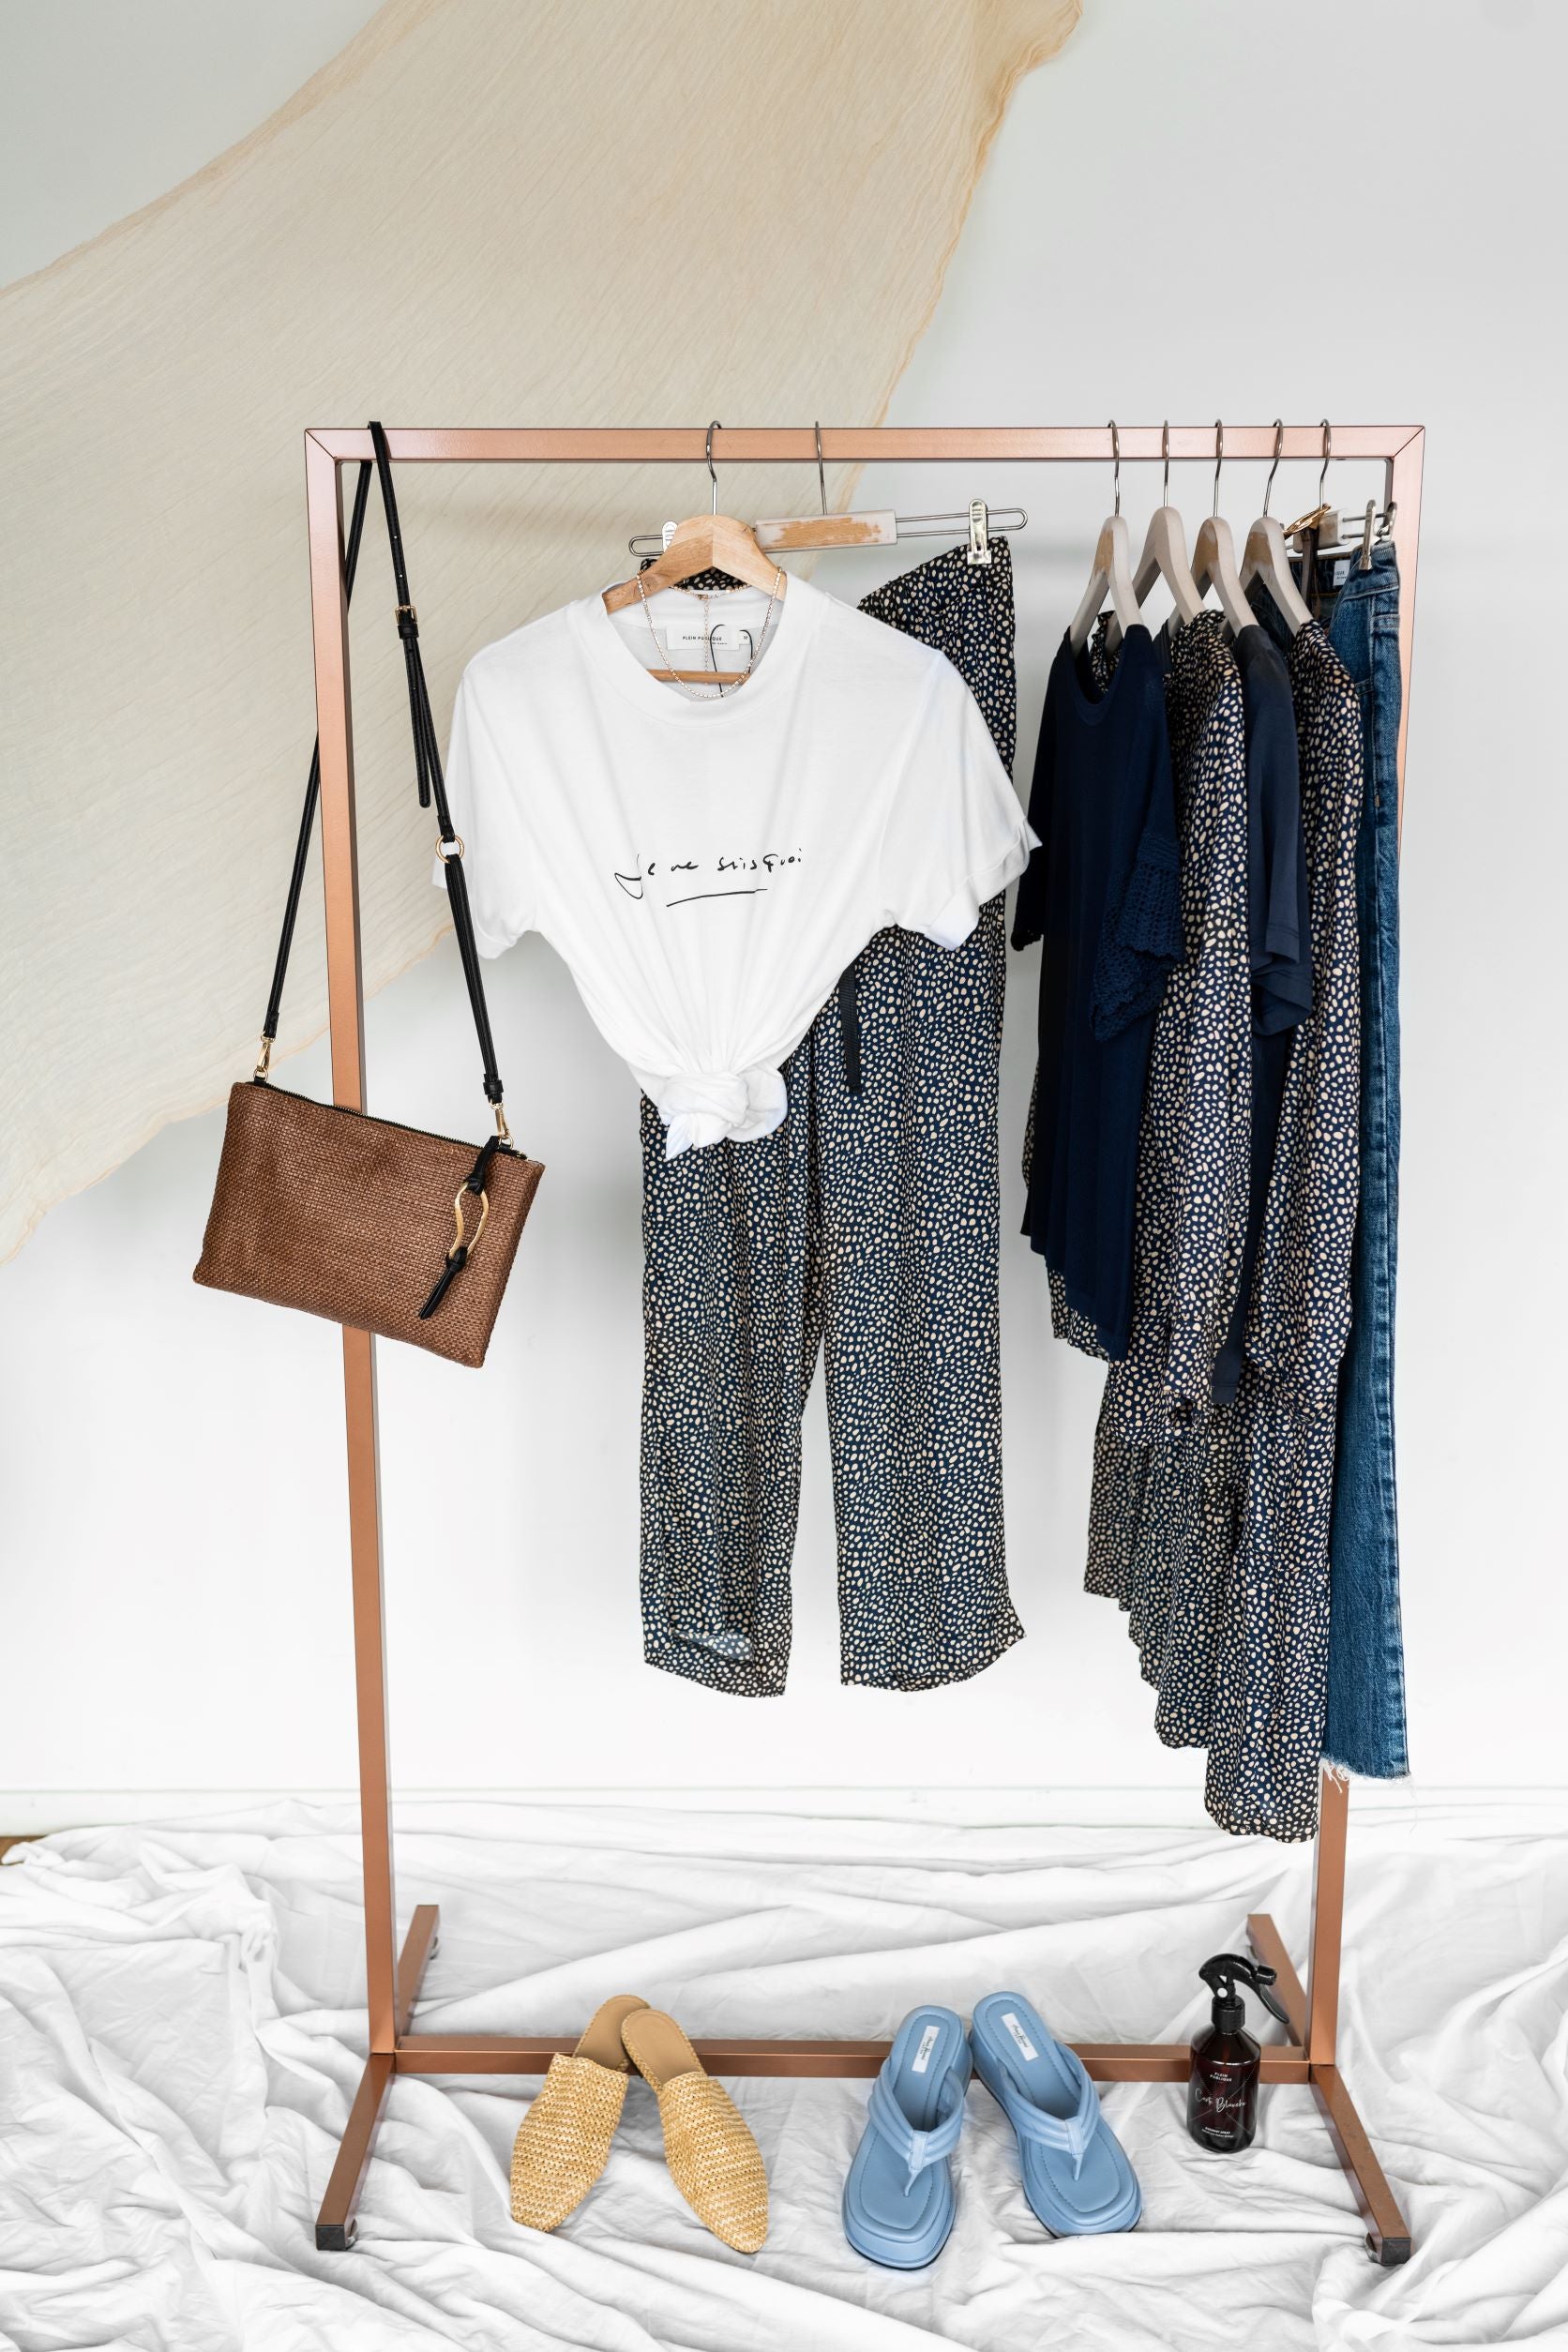 Easily create your own capsule wardrobe in 7 steps – PLEIN PUBLIQUE